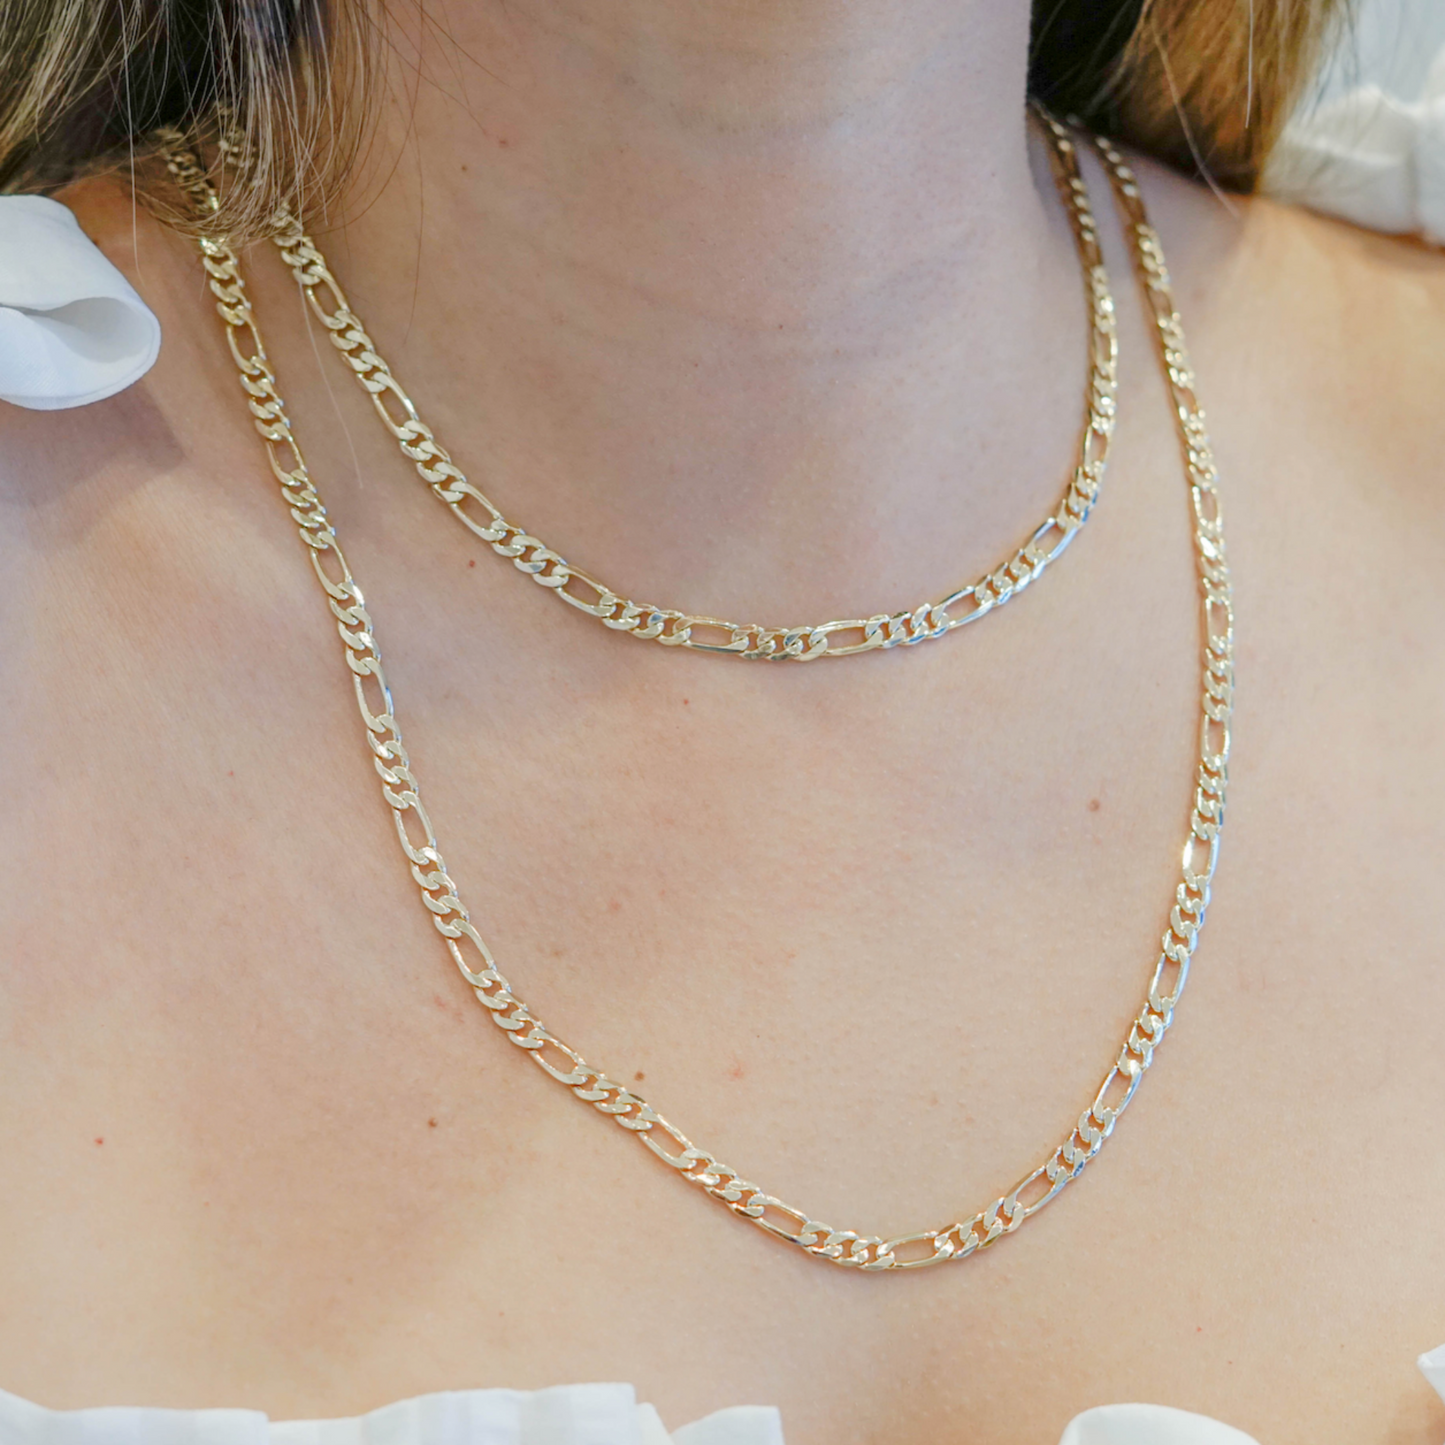 Figaro gold-filled necklaces, in two lengths, by ISVI Boutique Miami